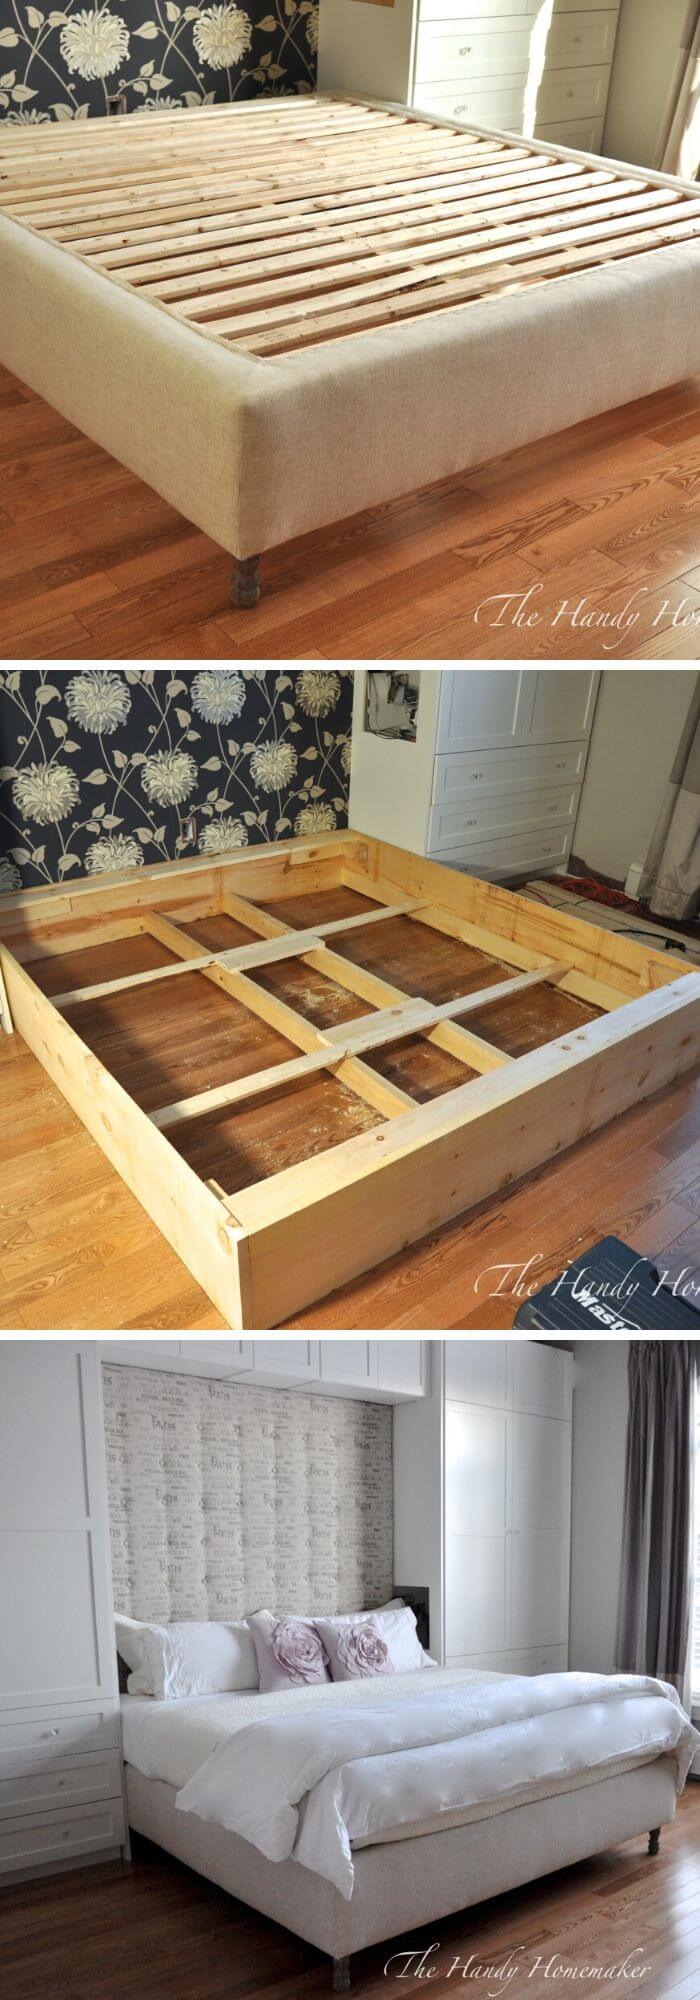 23 Clever Diy Bed Frame Ideas And Projects You Can Do In A Weekend